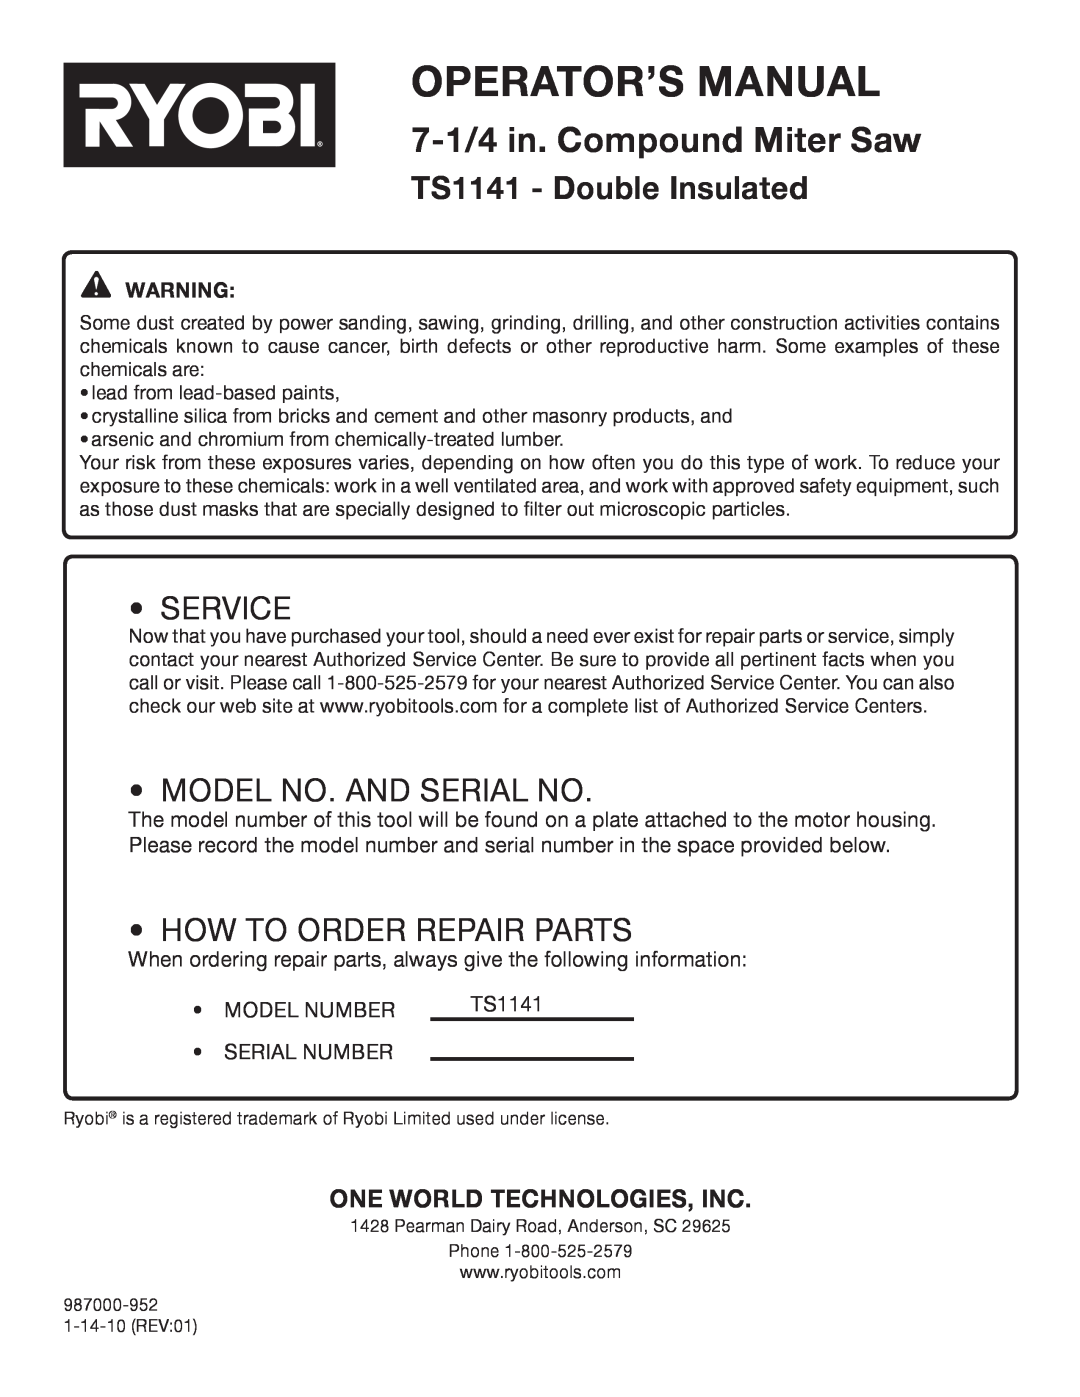 Ryobi One World Technologies, Inc, Operator’S Manual, 7-1/4 in. Compound Miter Saw, TS1141 - Double Insulated, Service 